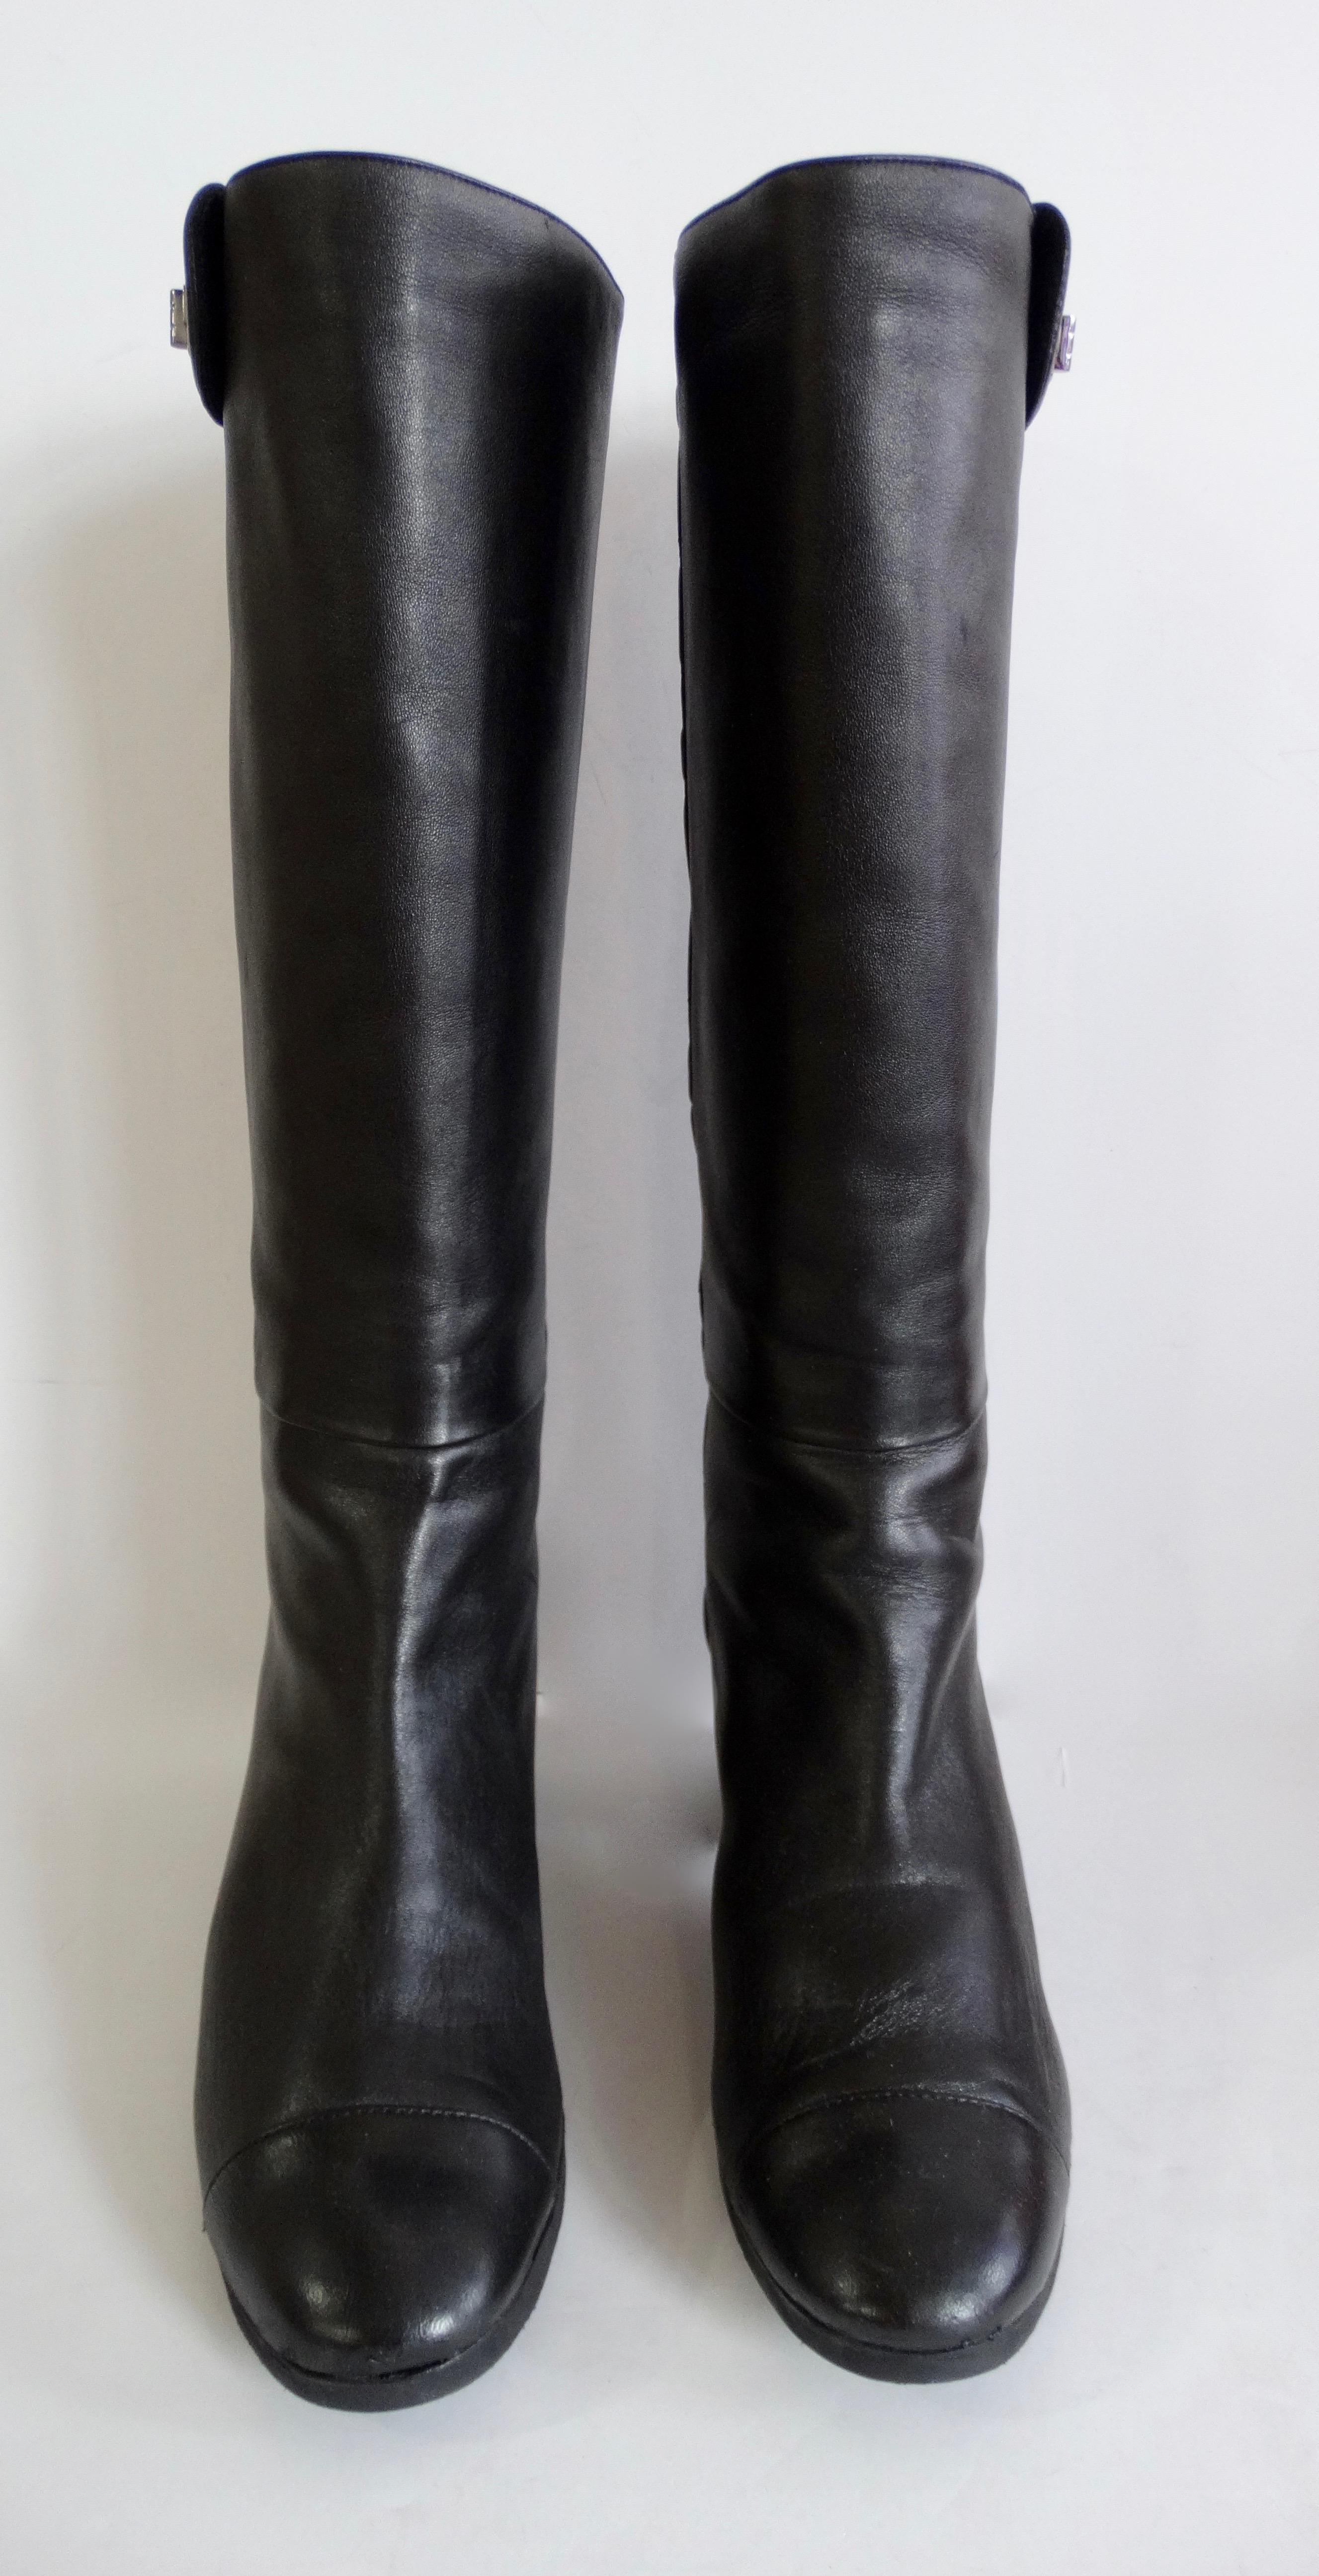 Complete all your fall outfits with these adorable Chanel boots! Circa 2009 from their Fall/Winter collection, these knee high boots are crafted from soft black leather and feature the signature Chanel quilted stitching on the back. Include cap